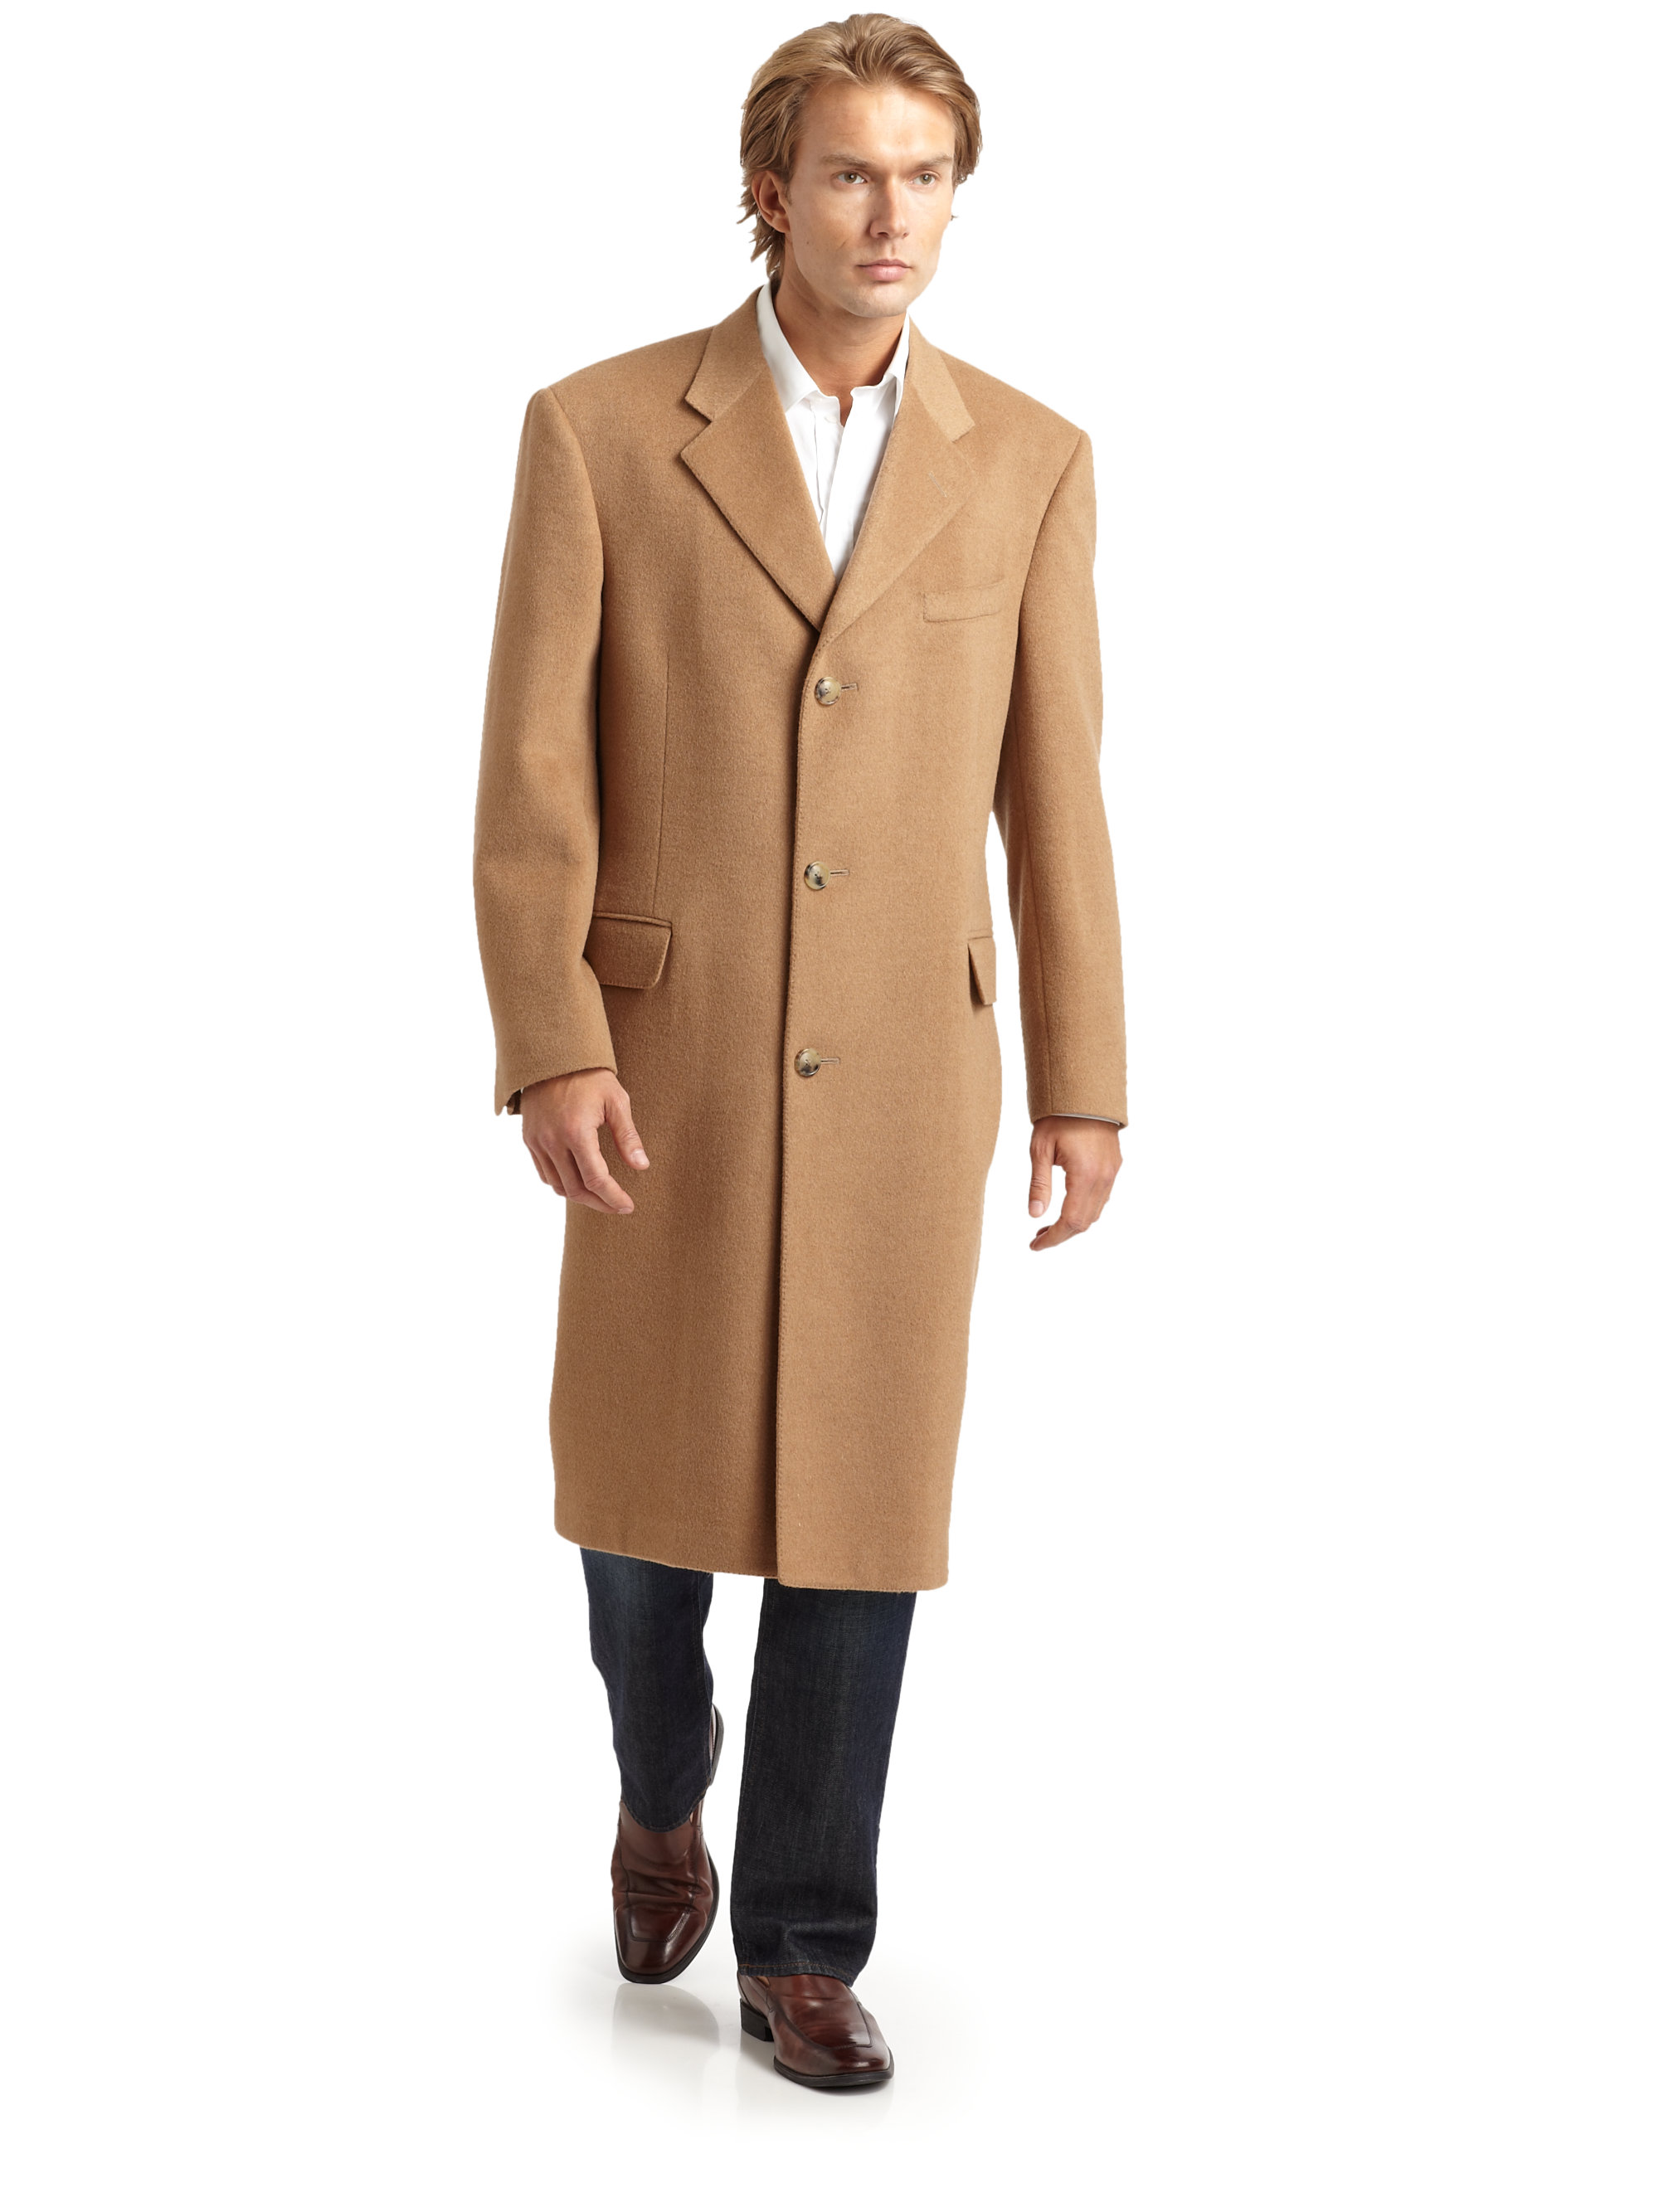 Hickey freeman Cashmere Flap Pocket Coat in Natural for Men | Lyst